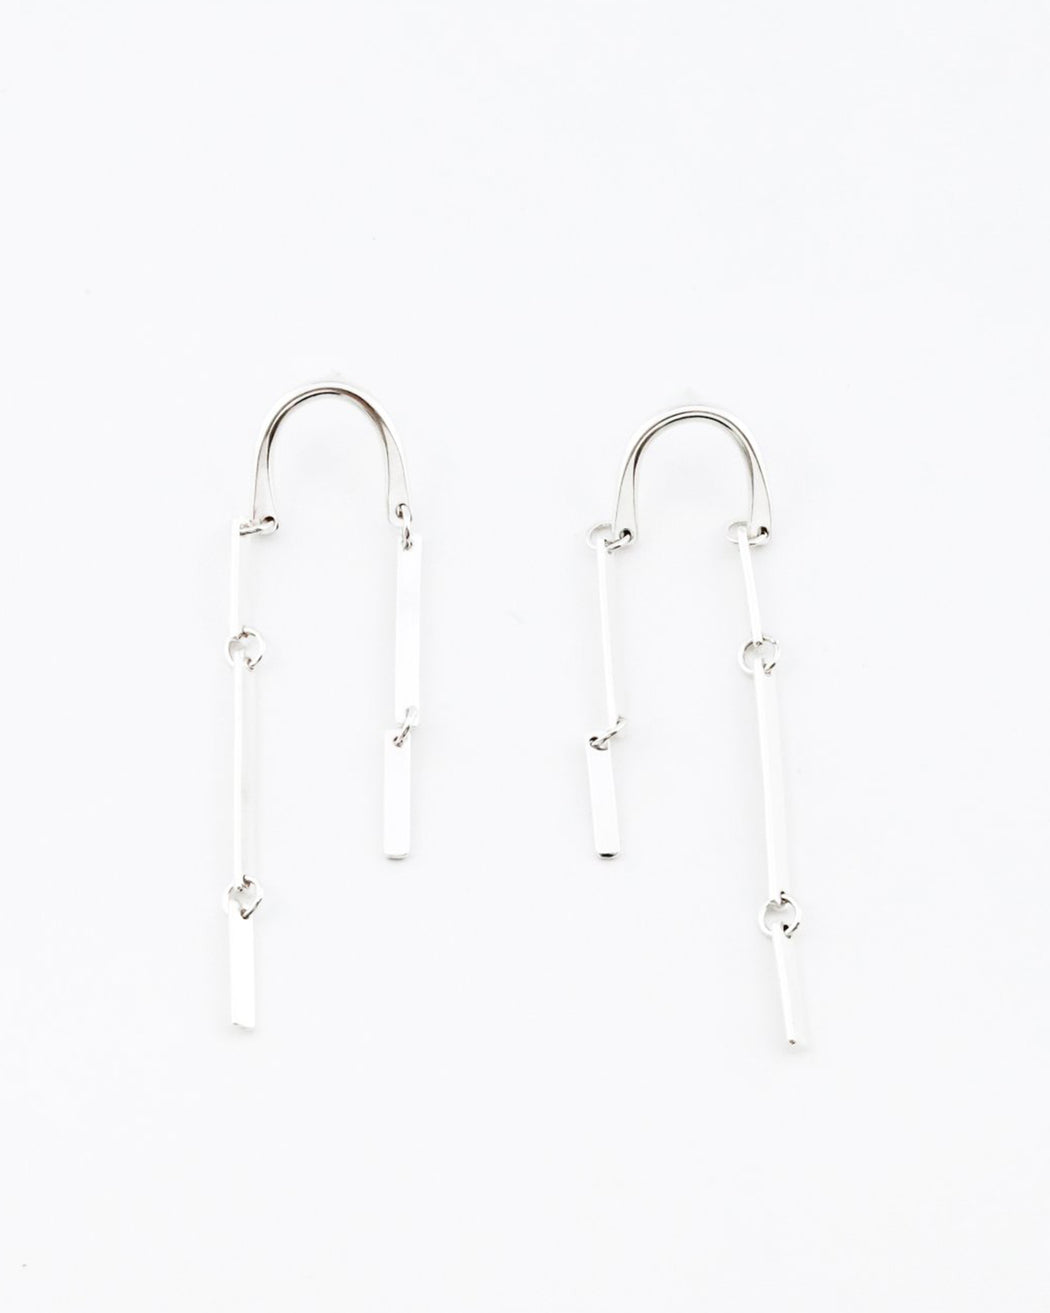 Another Feather:Cascade Earrings,ANOMIE